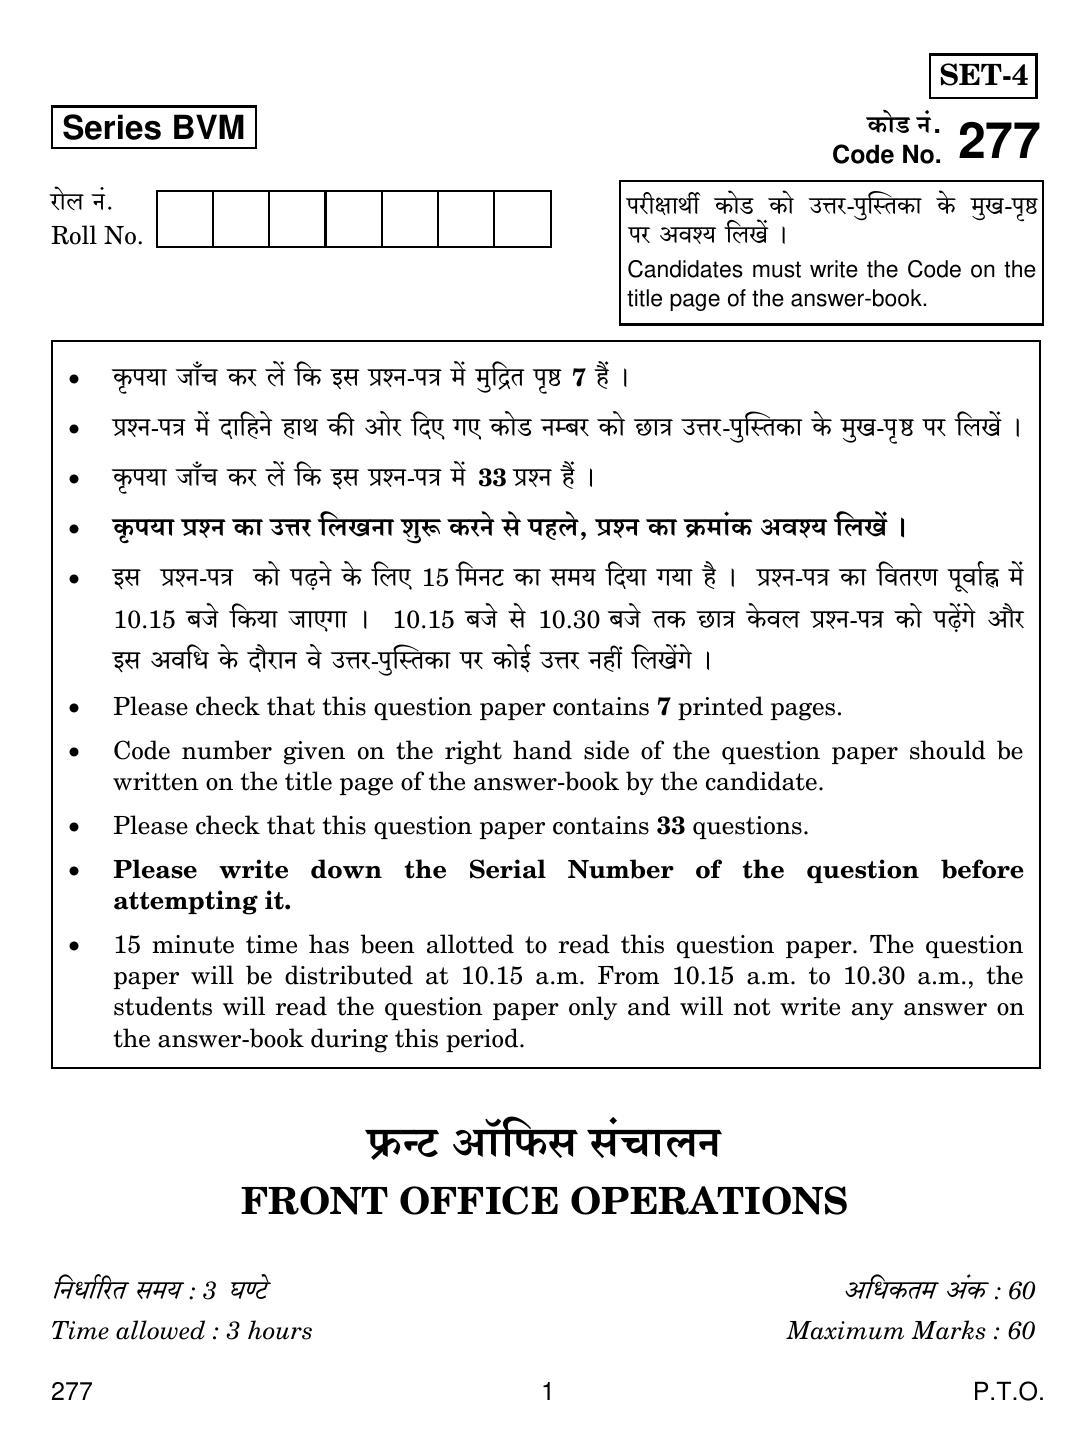 CBSE Class 12 277 Front Office Operations 2019 Question Paper - Page 1